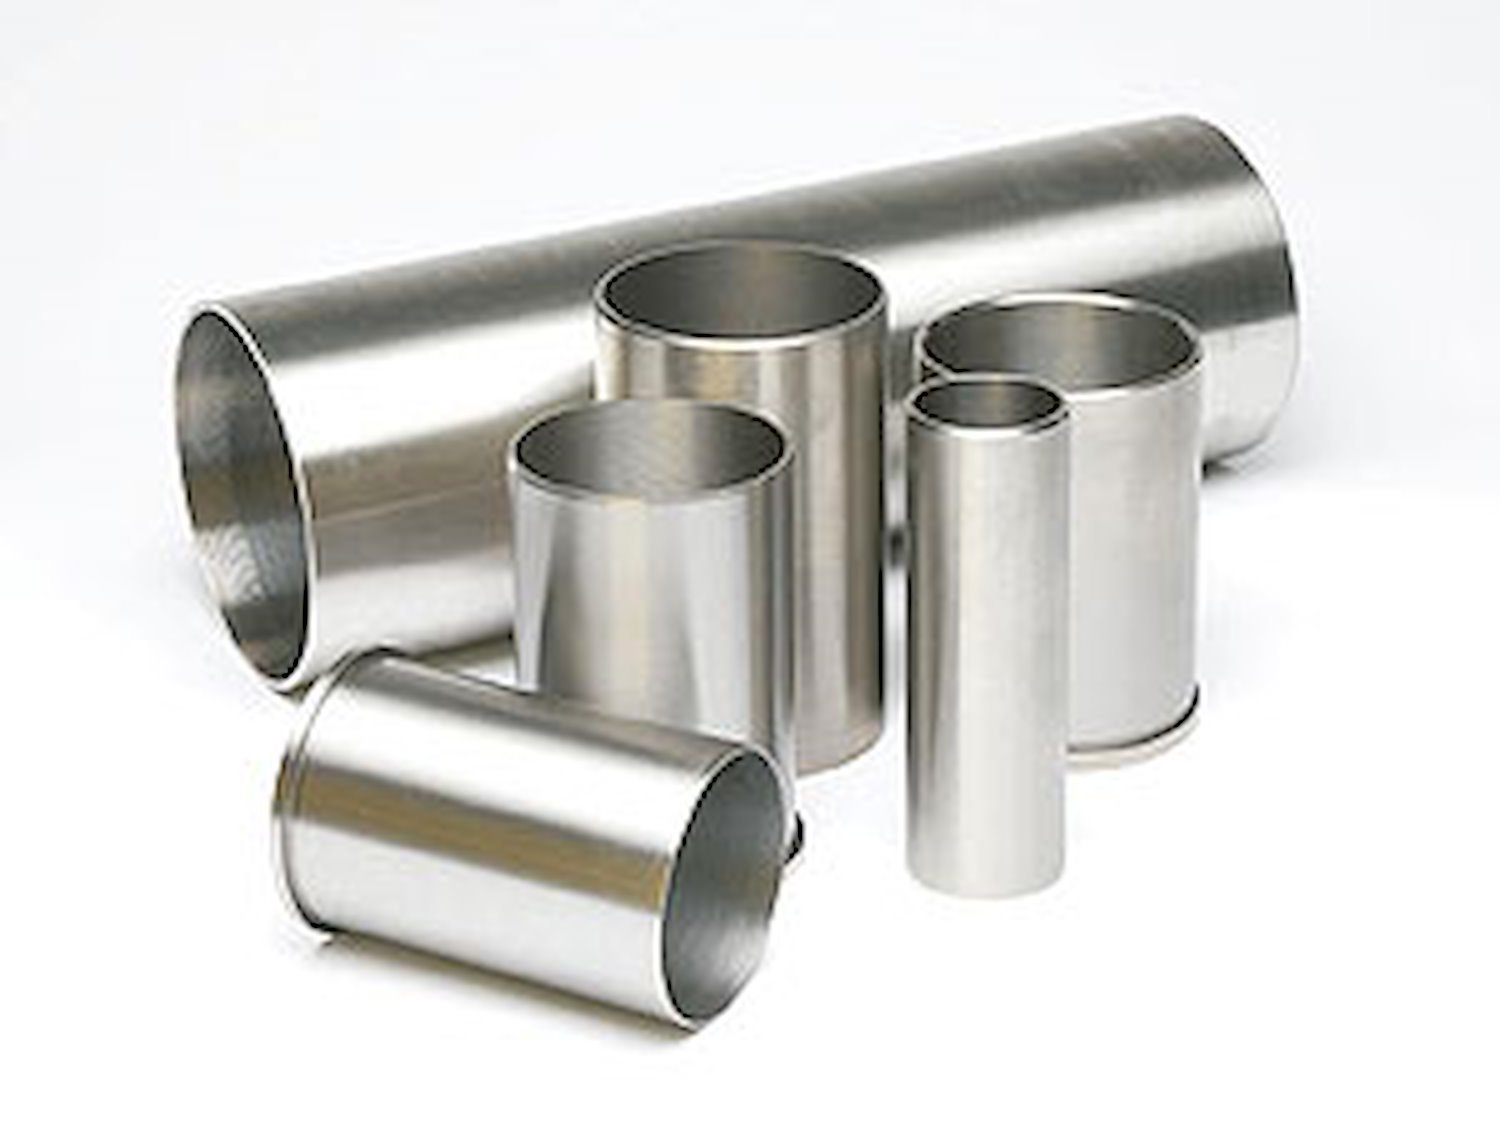 Cylinder Sleeve Bore: 3.0710" Length: 6-3/8" Wall Thickness: 1/8"